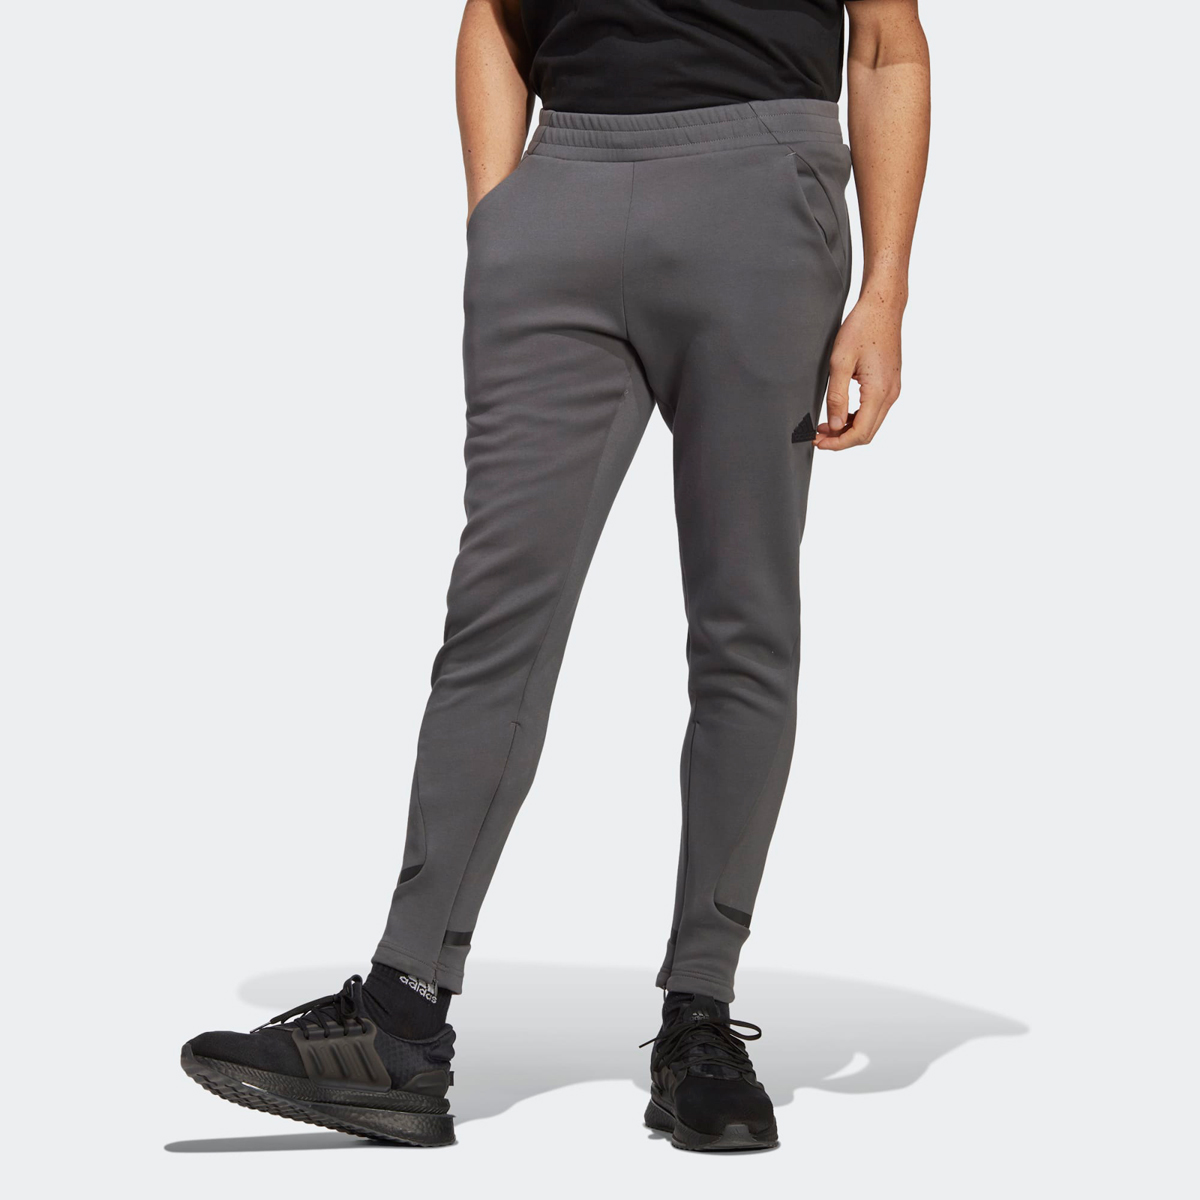 adidas-Designed-for-Gameday-Pants-Grey